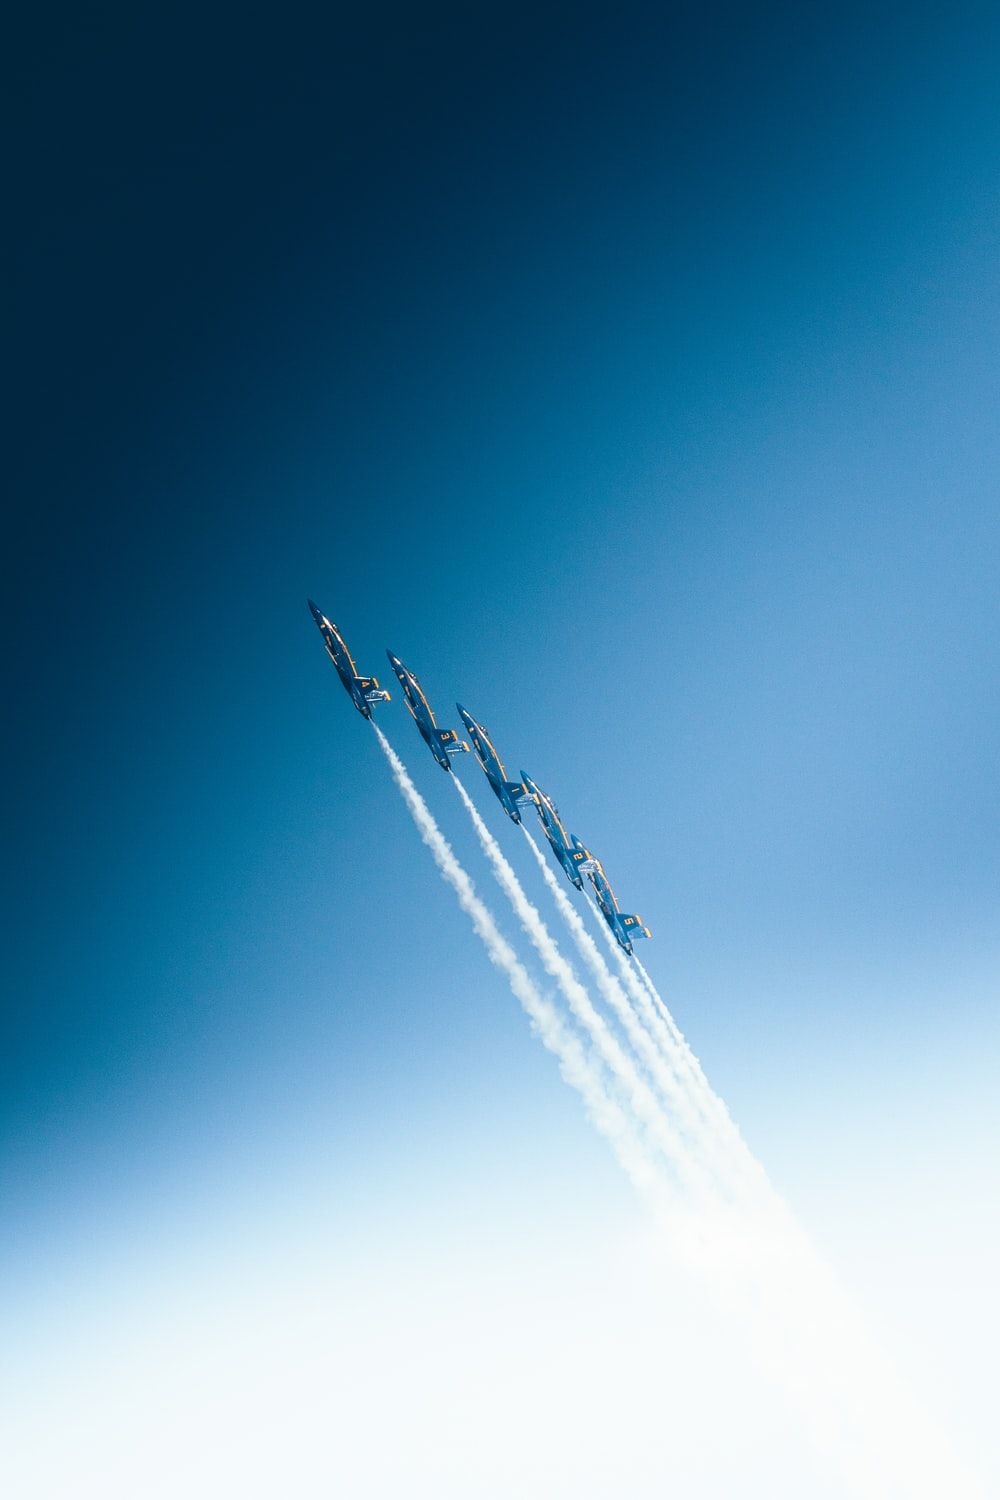 Aerospace Picture. Download Free Image